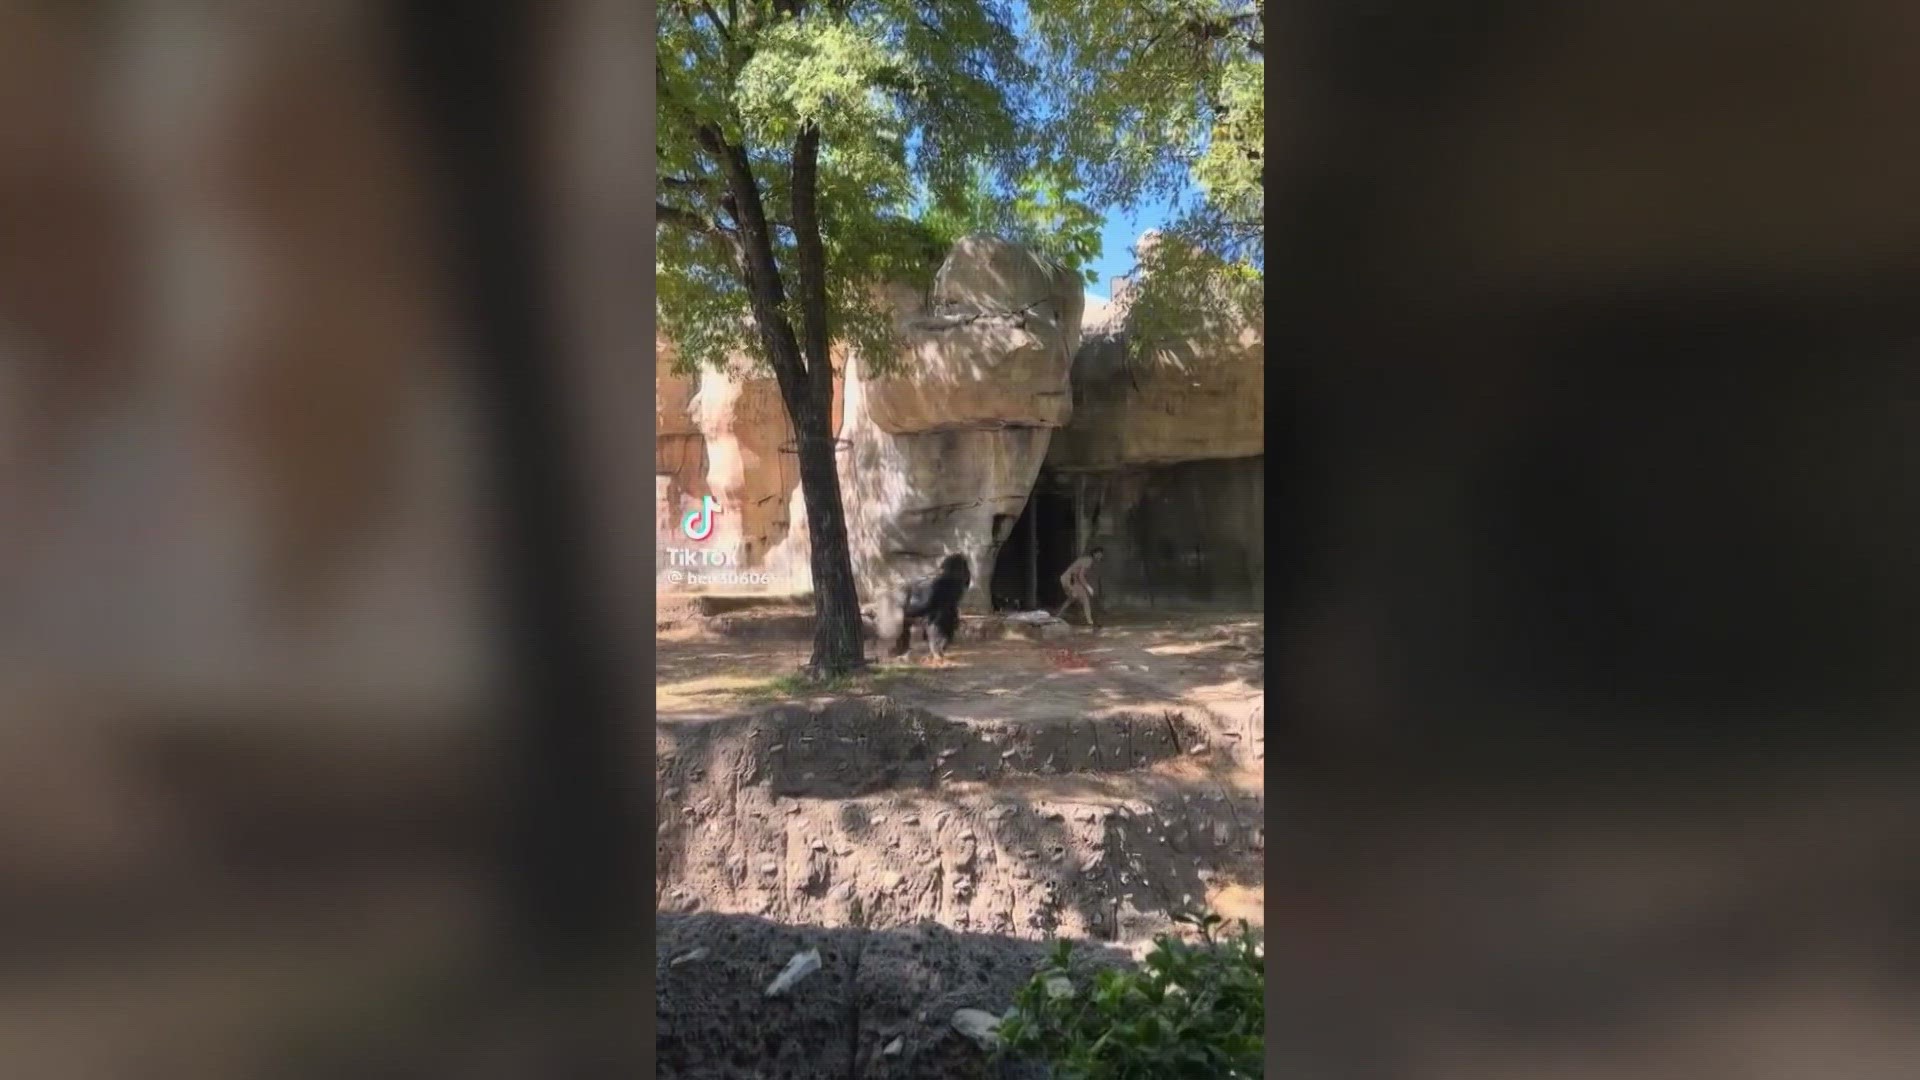 Throughout the video, you can hear zoo visitors call for help.